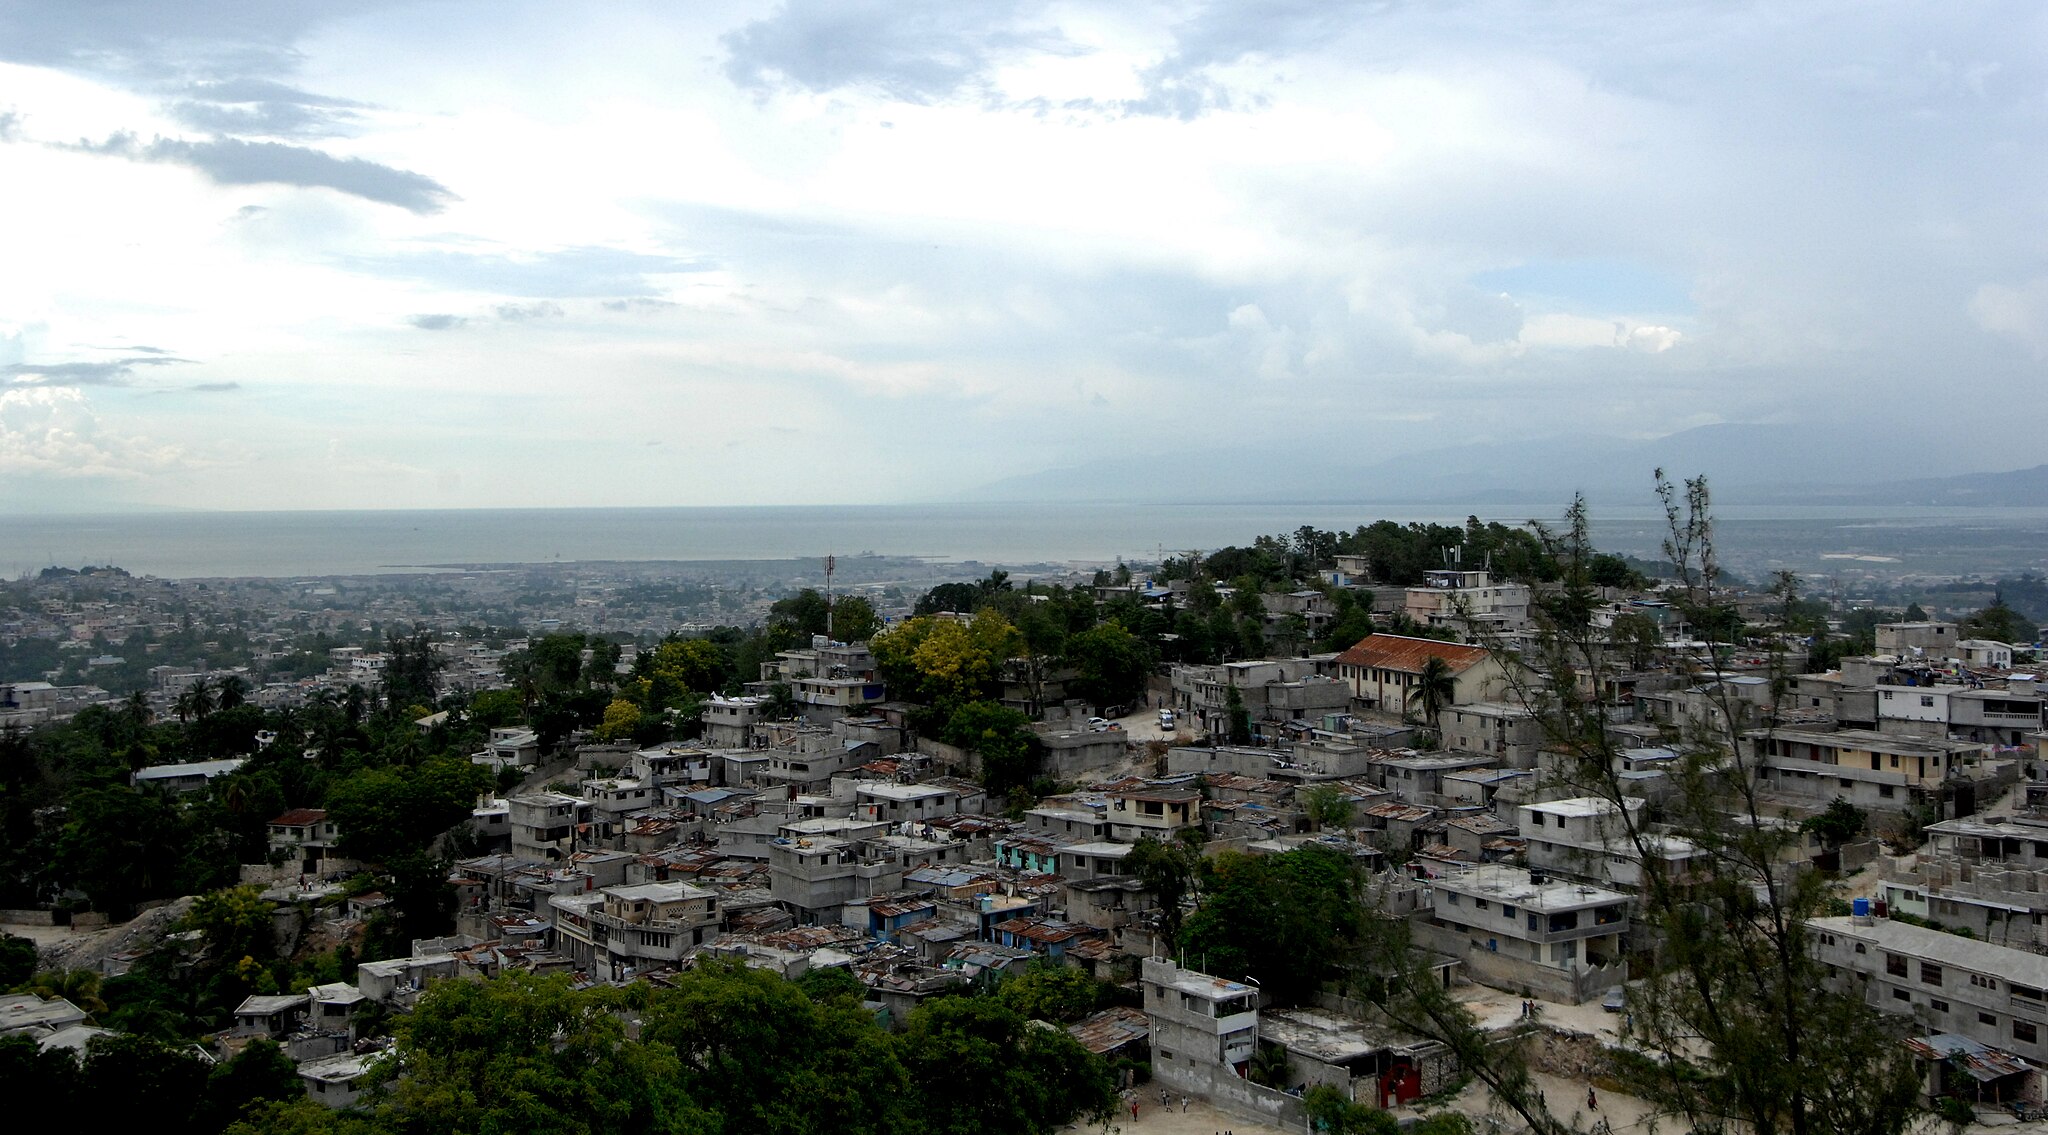 UN High Commissioner reports unprecedented human rights abuses amid violence in Haiti